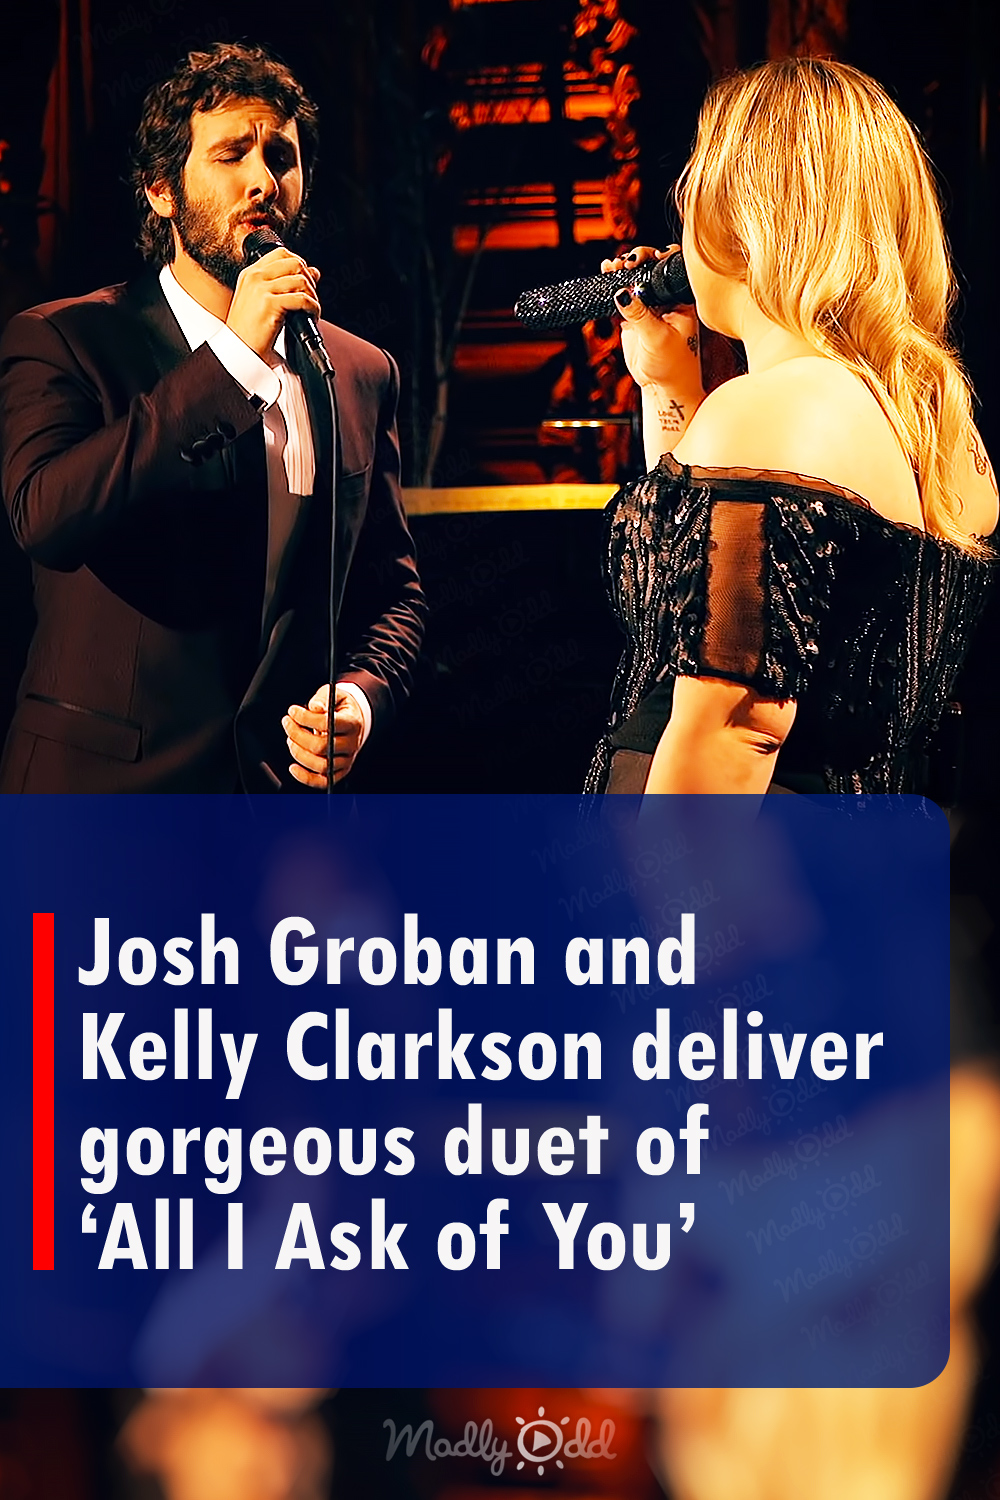 Josh Groban and Kelly Clarkson deliver gorgeous duet of ‘All I Ask of You’